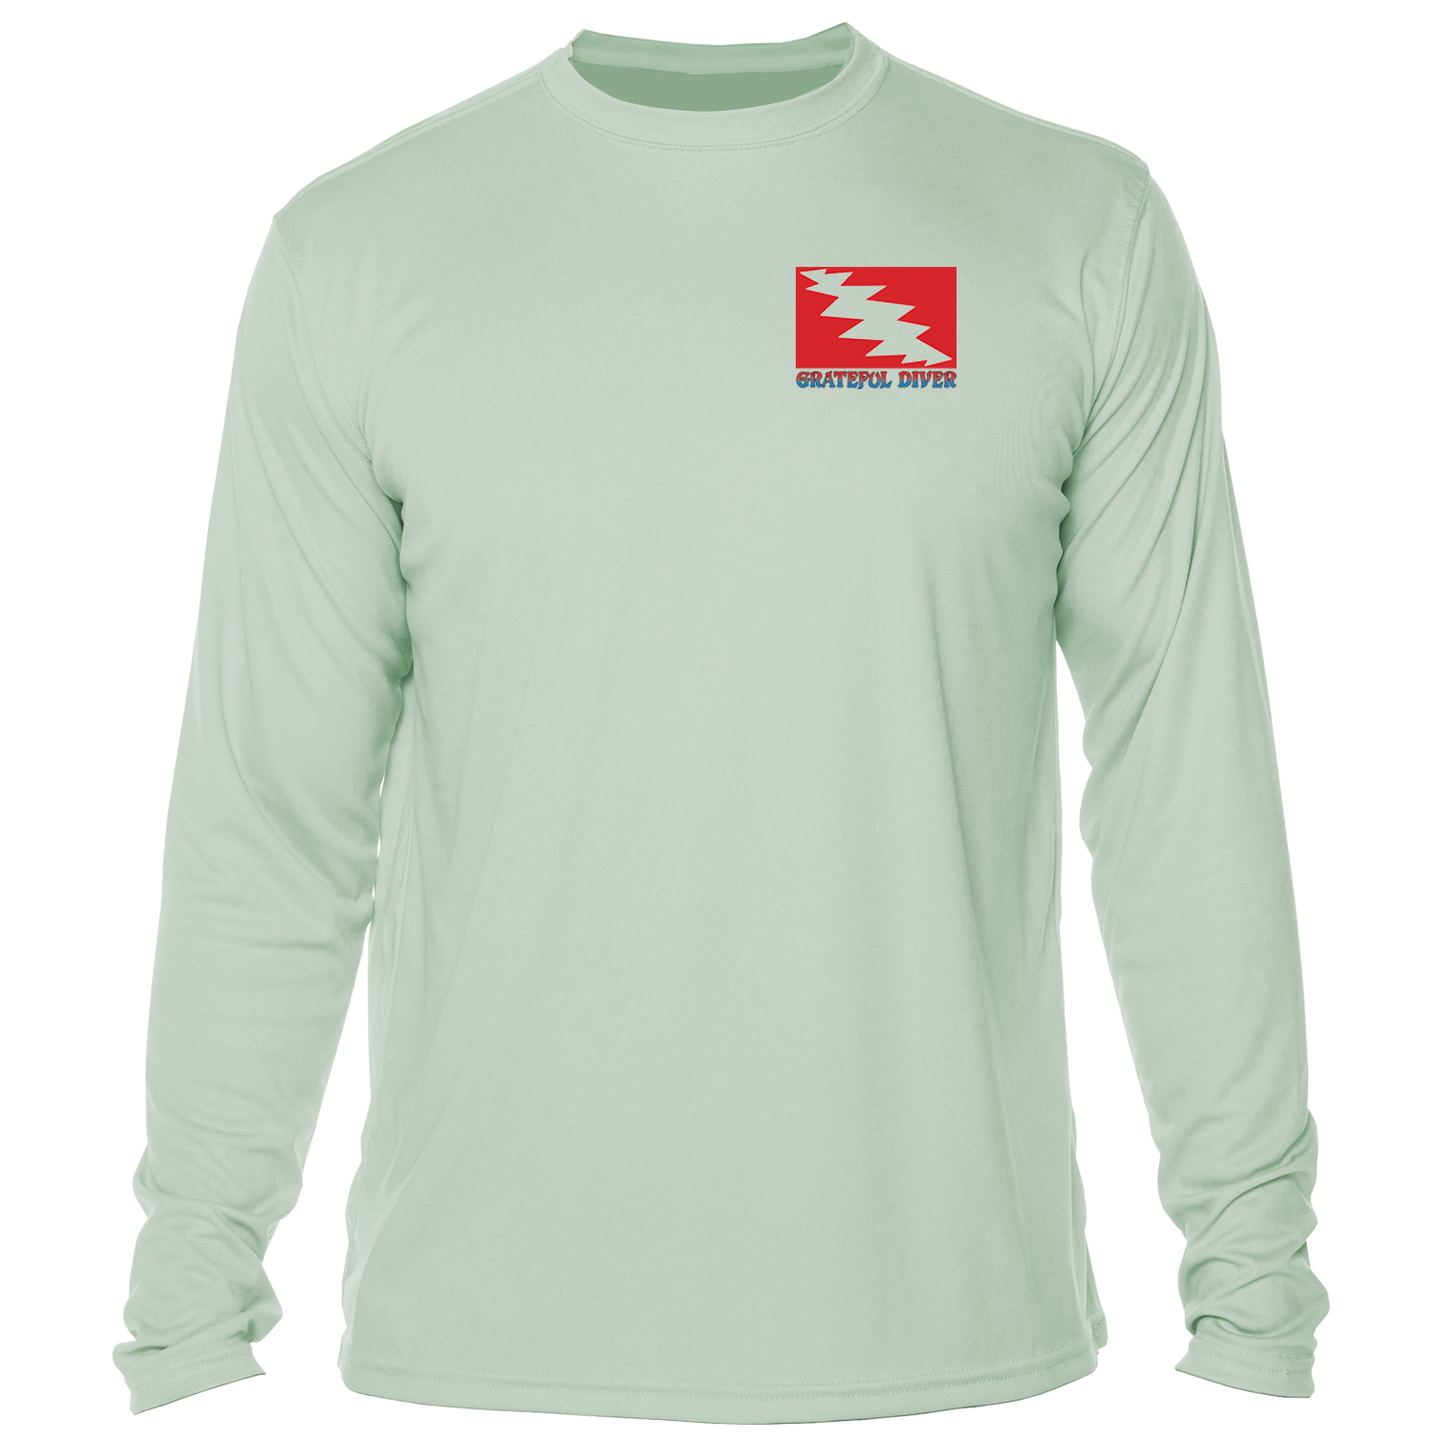 Grateful Diver Ship of Fools UV Shirt in seagrass showing the front diver flag logo